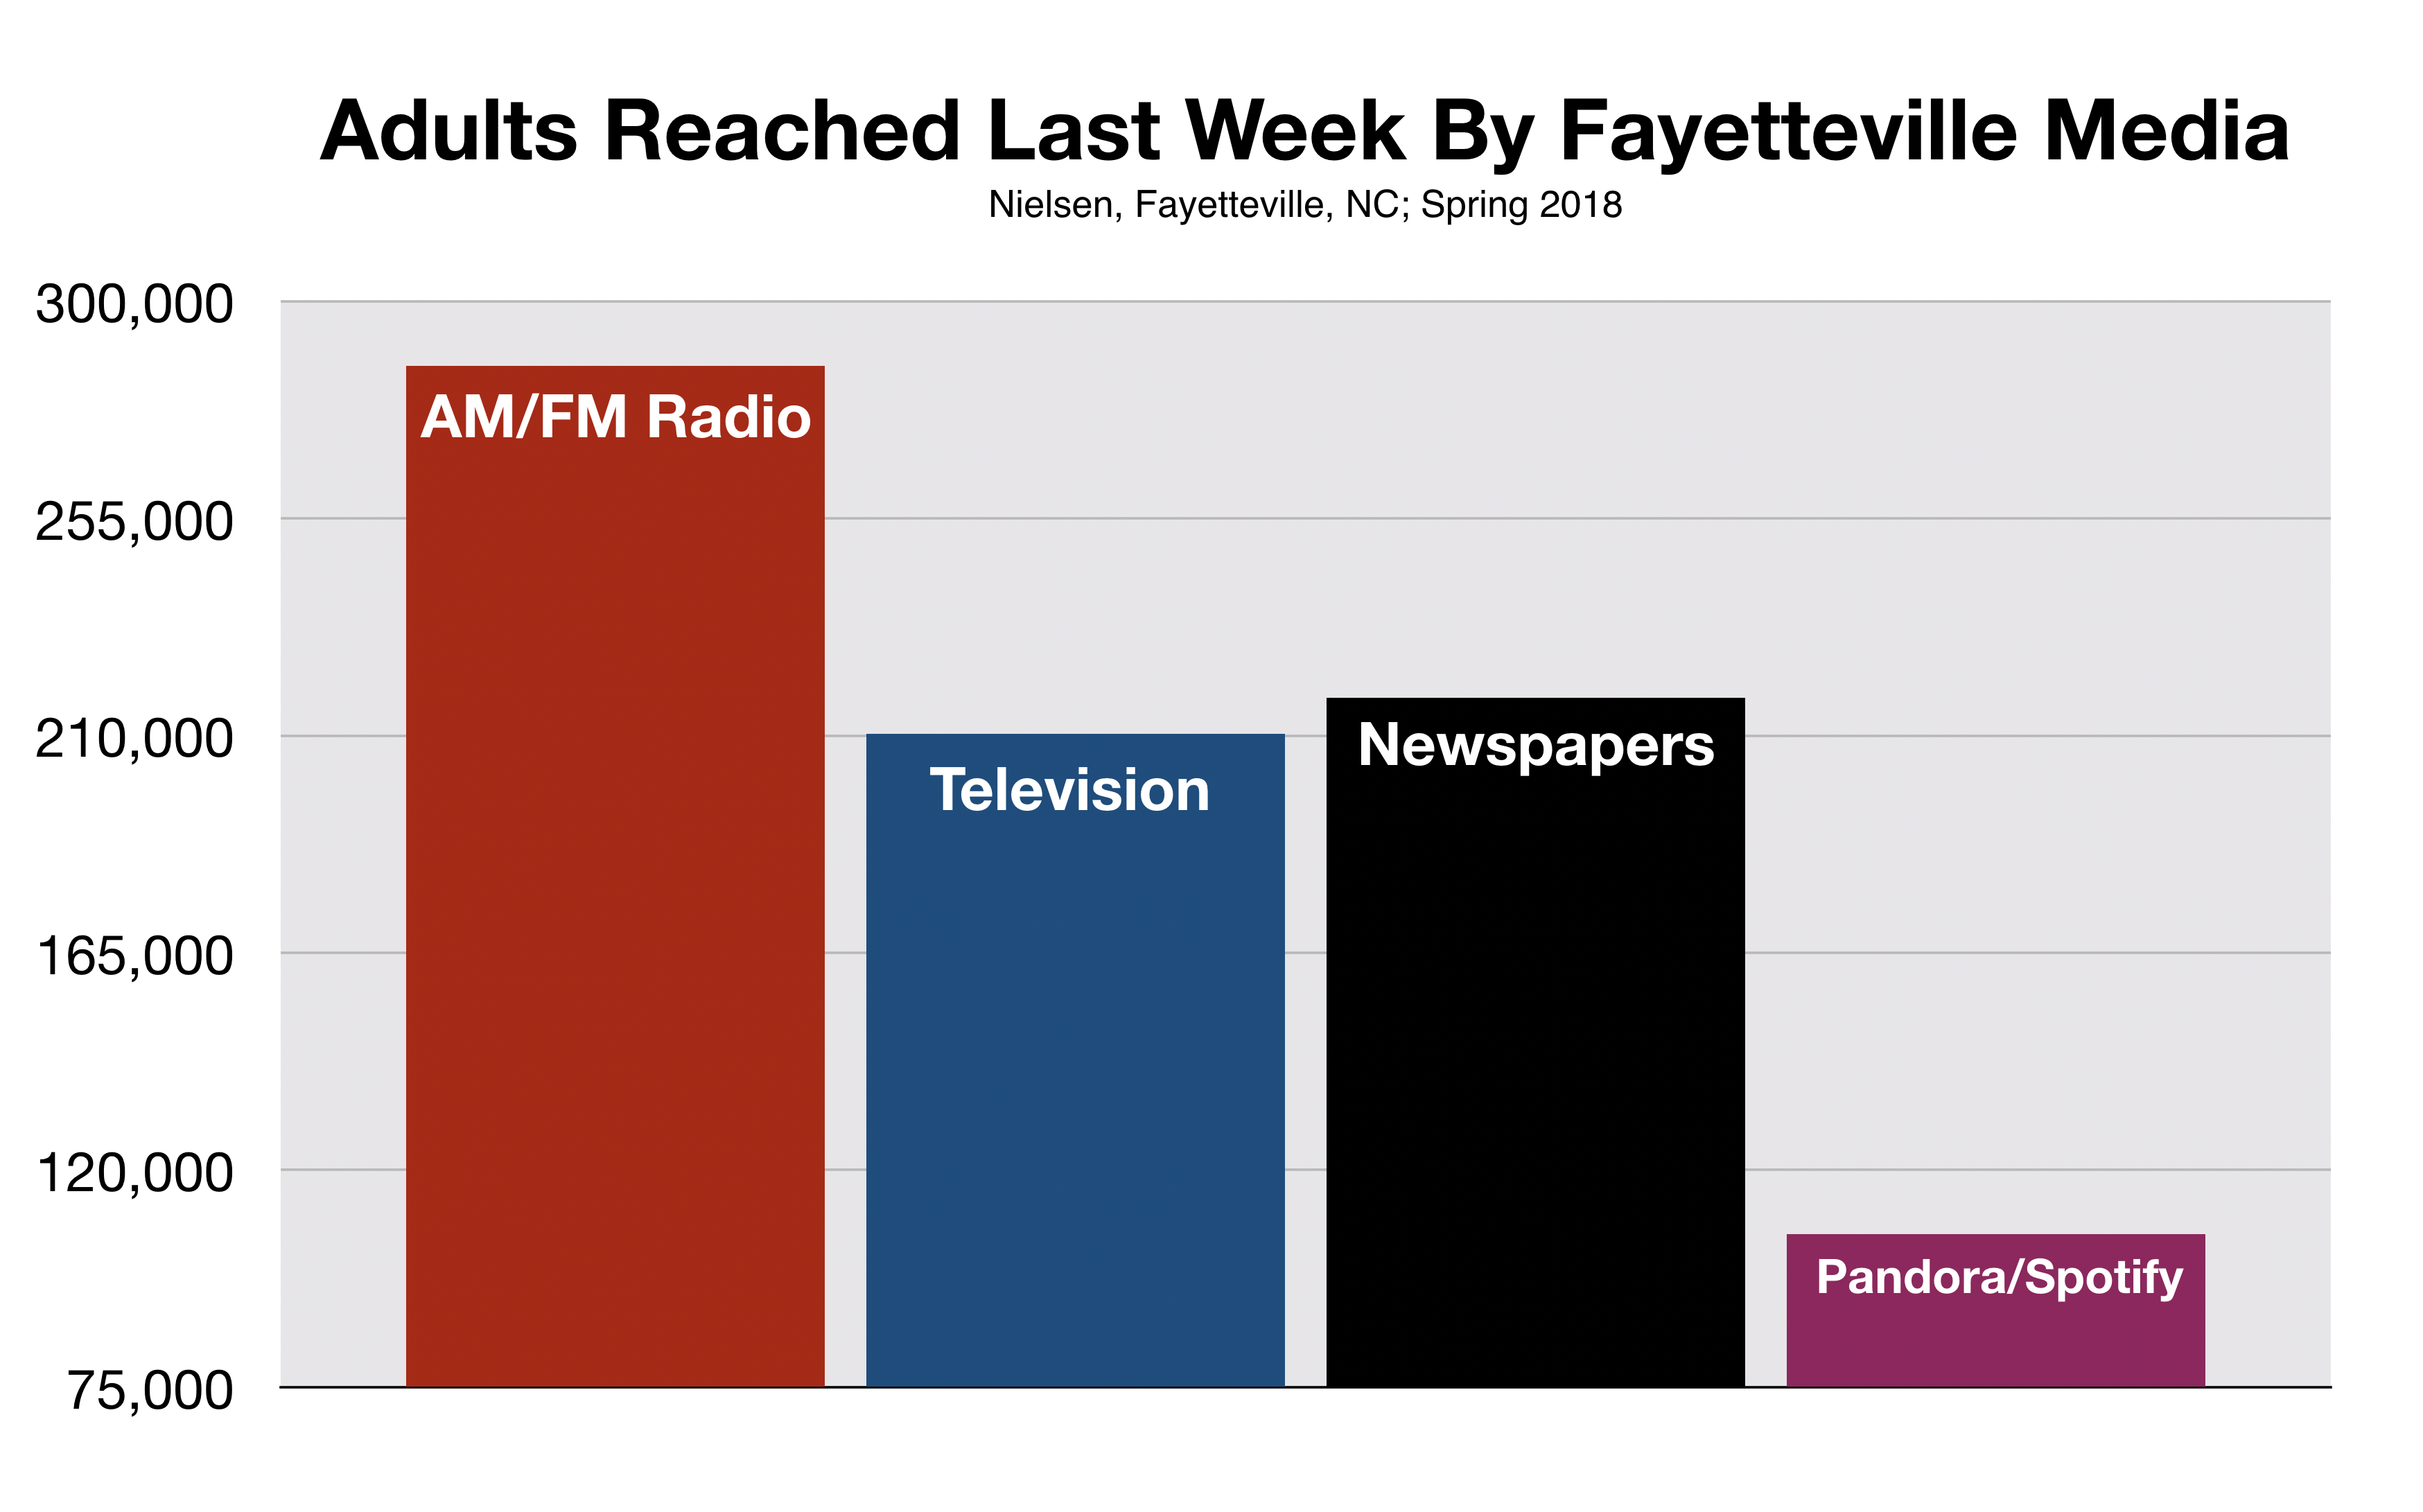 Reach of Fayetteville Advertising Includes Pandora and Spotify